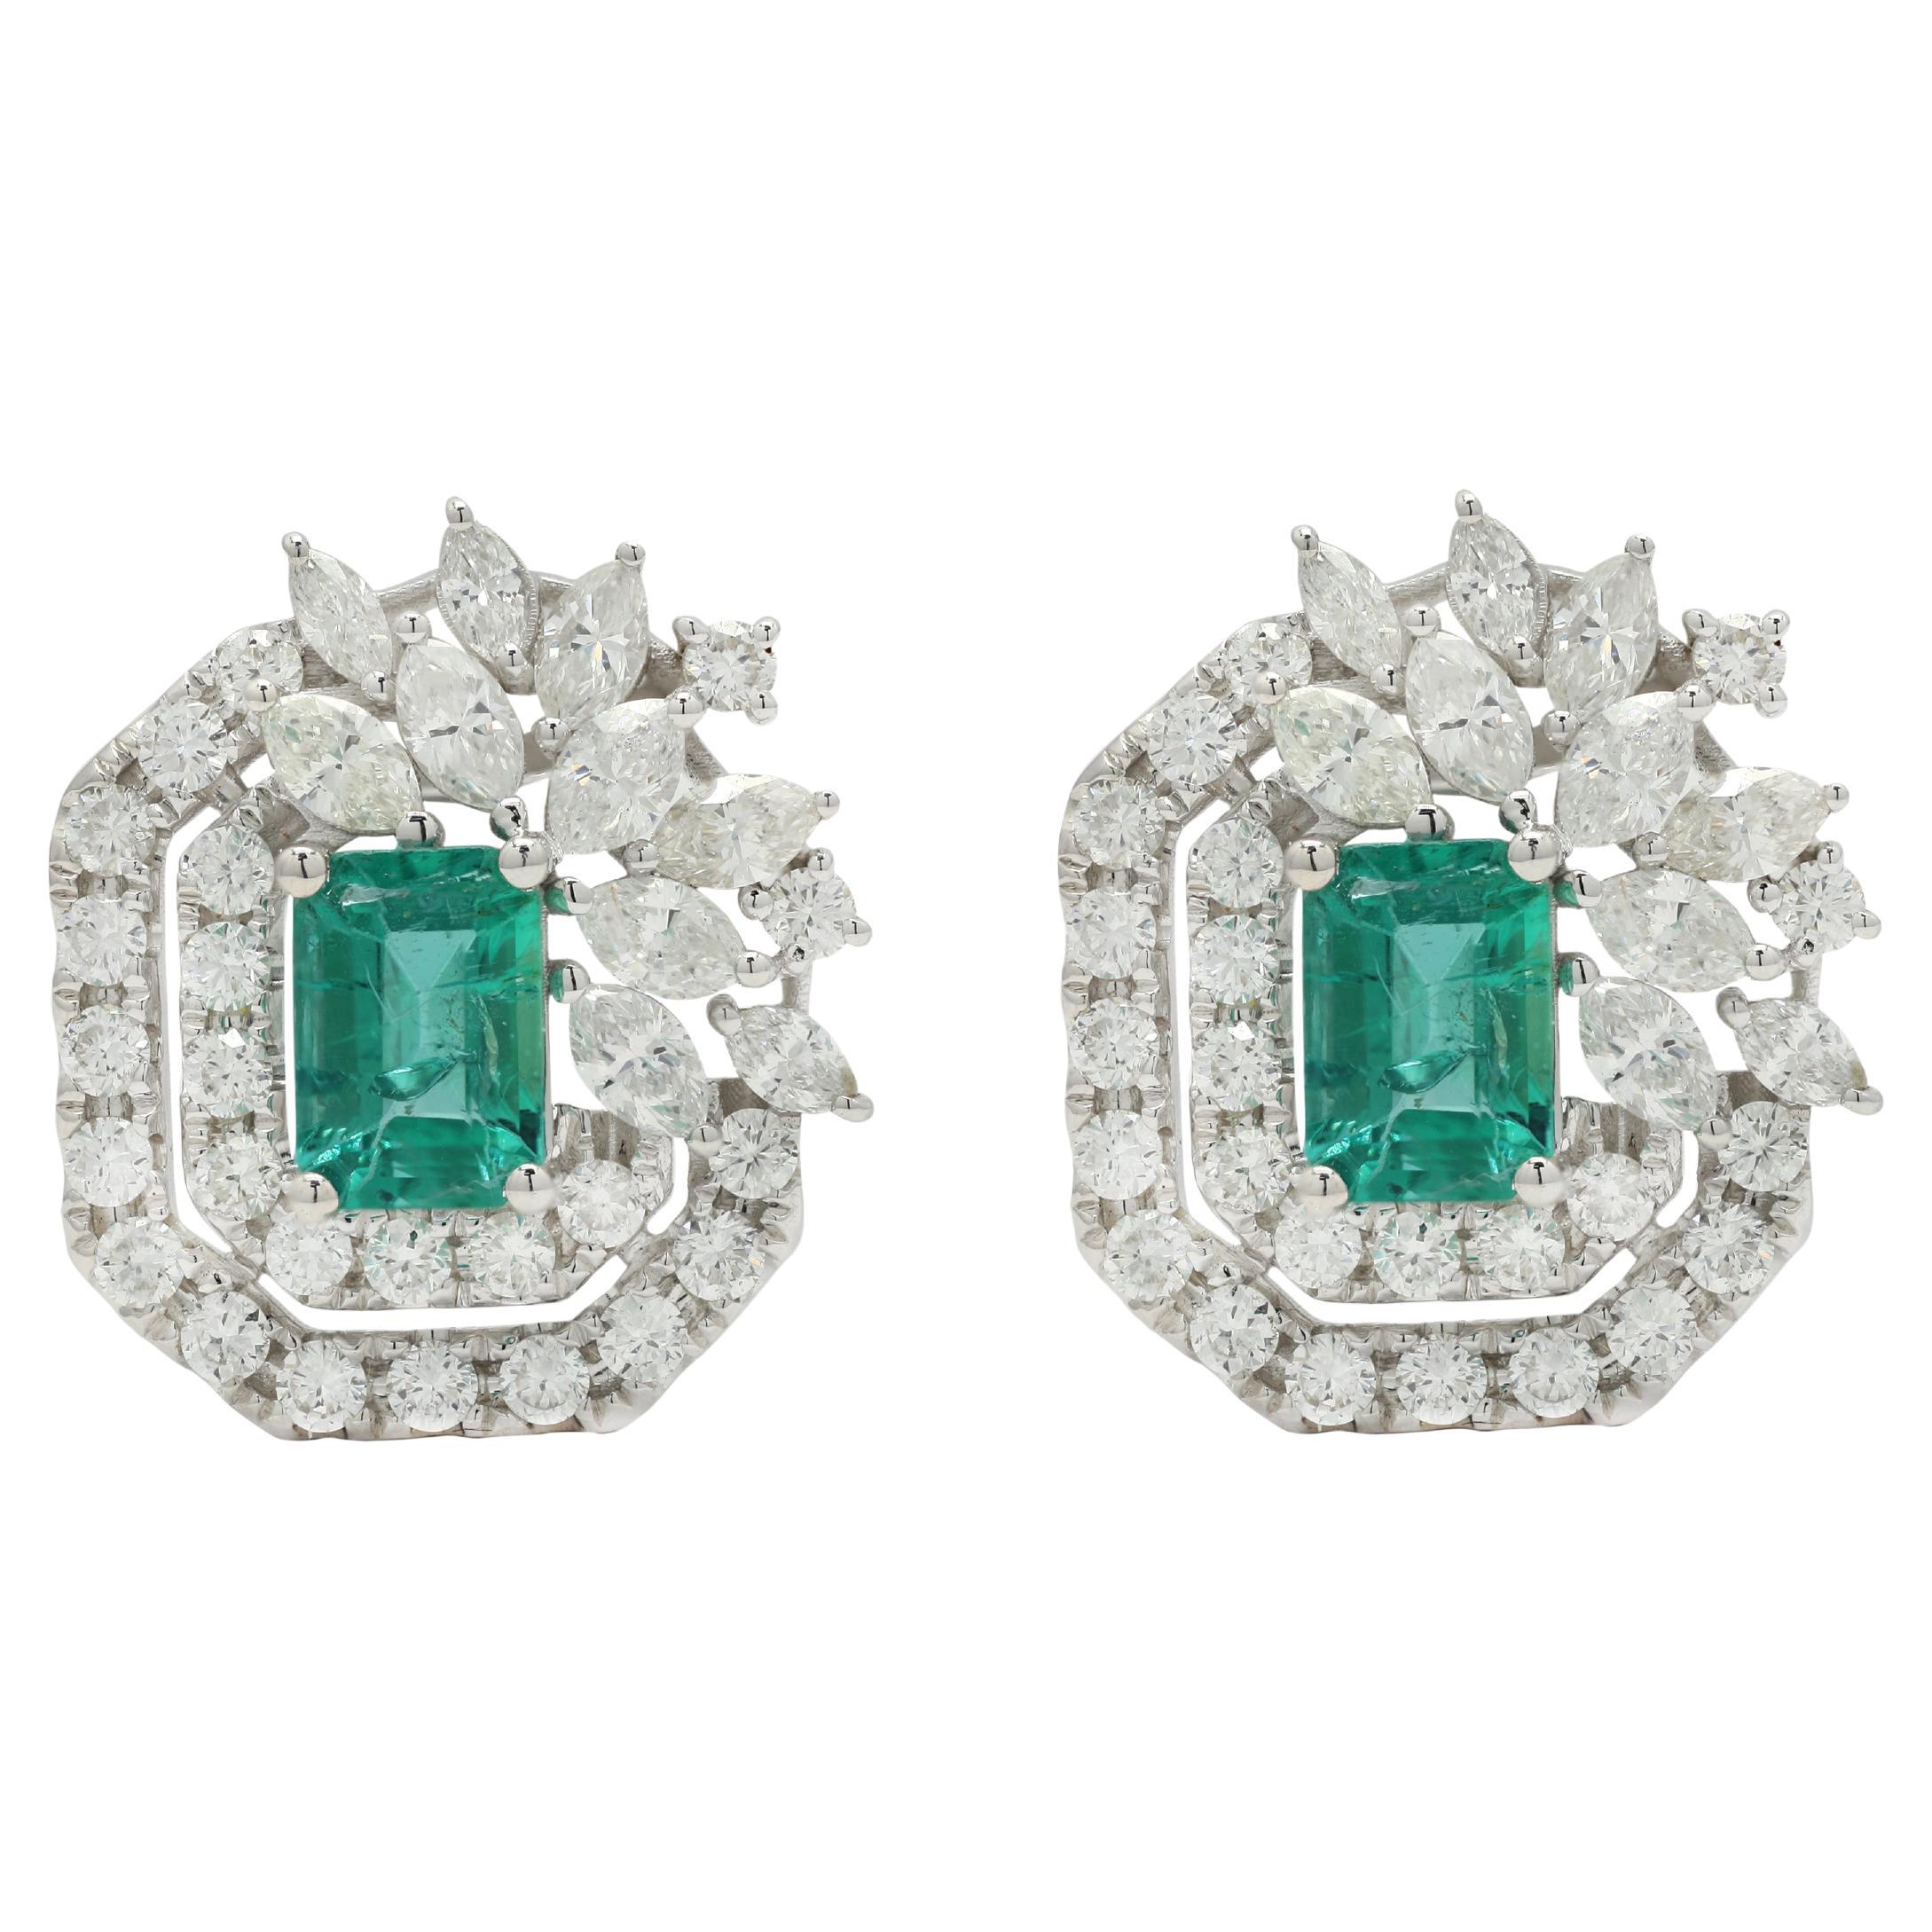 Emerald Encompassed with Diamonds Floral Stud Earrings in 14K Solid White Gold